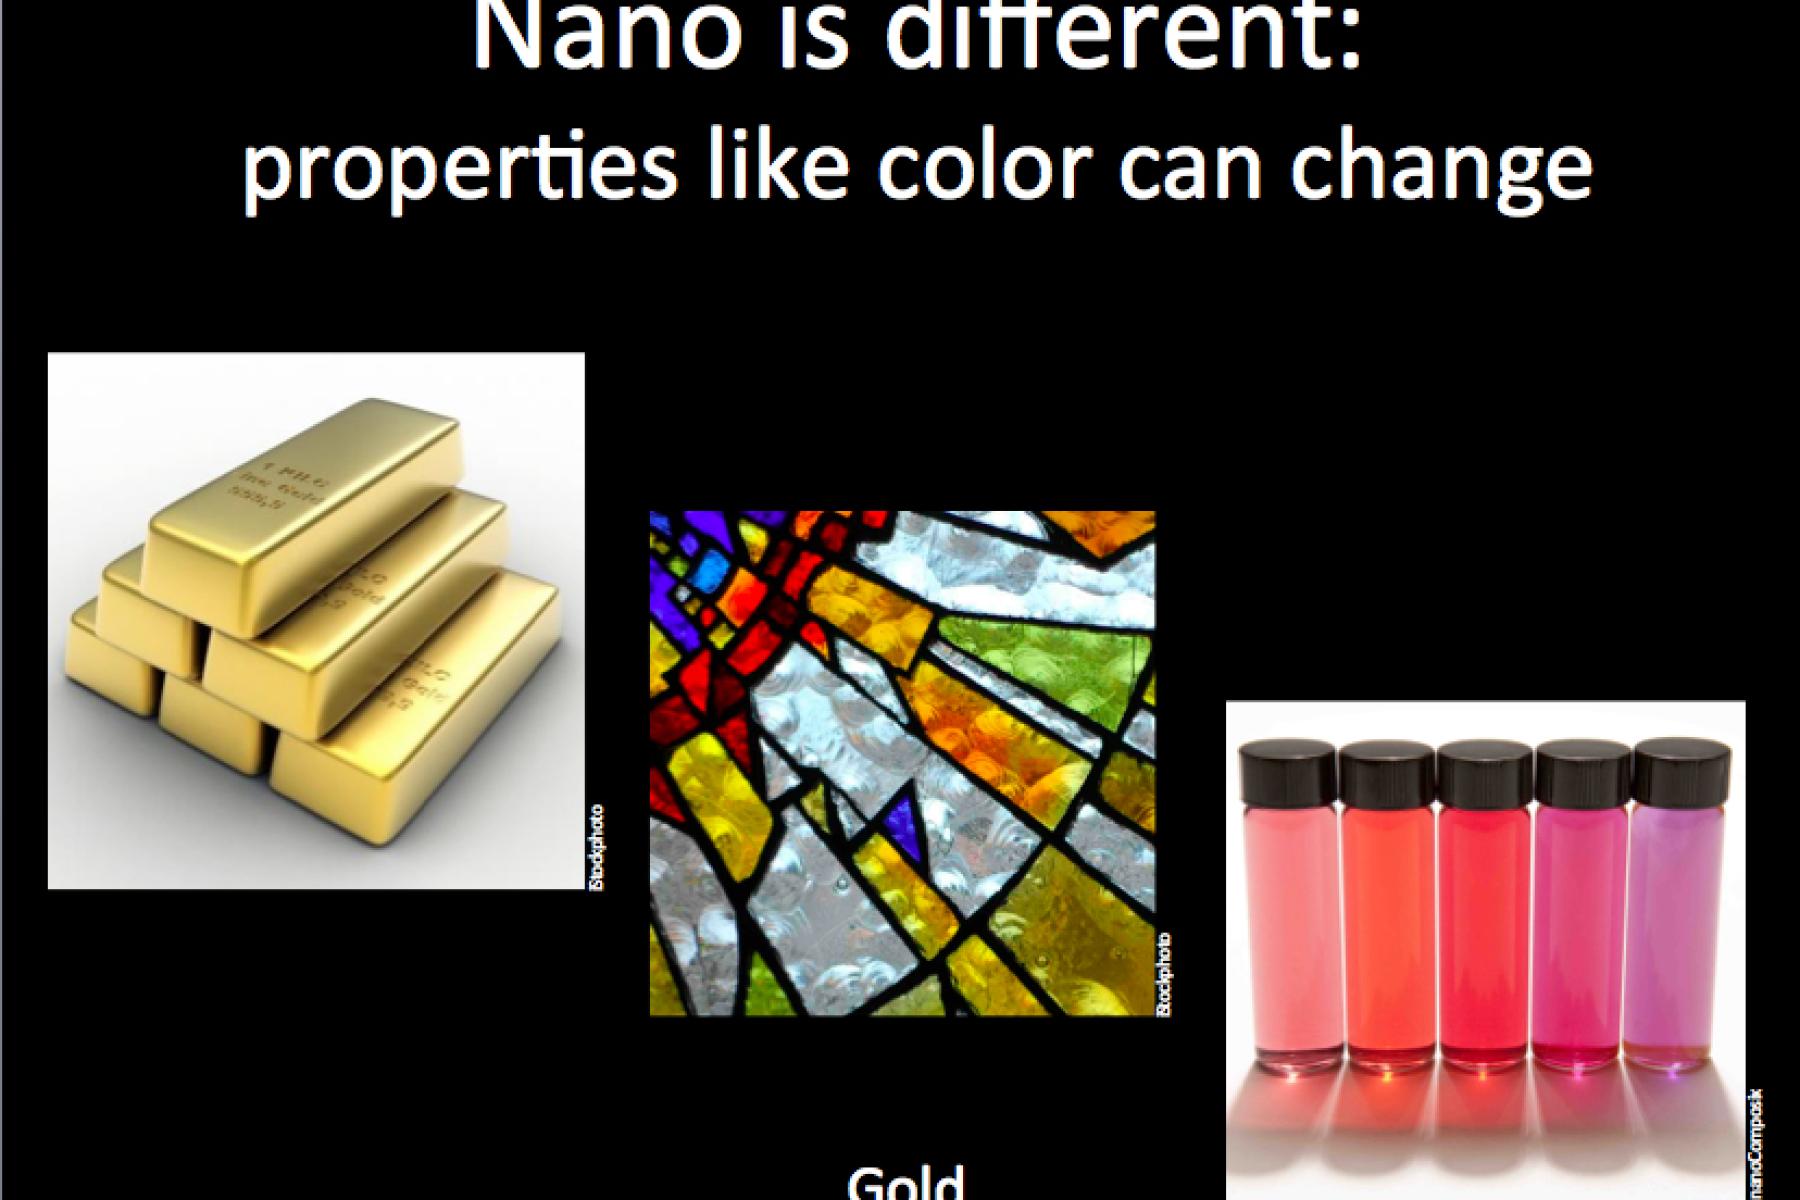 Nano is different slide showing gold, nano gold, and stained glass